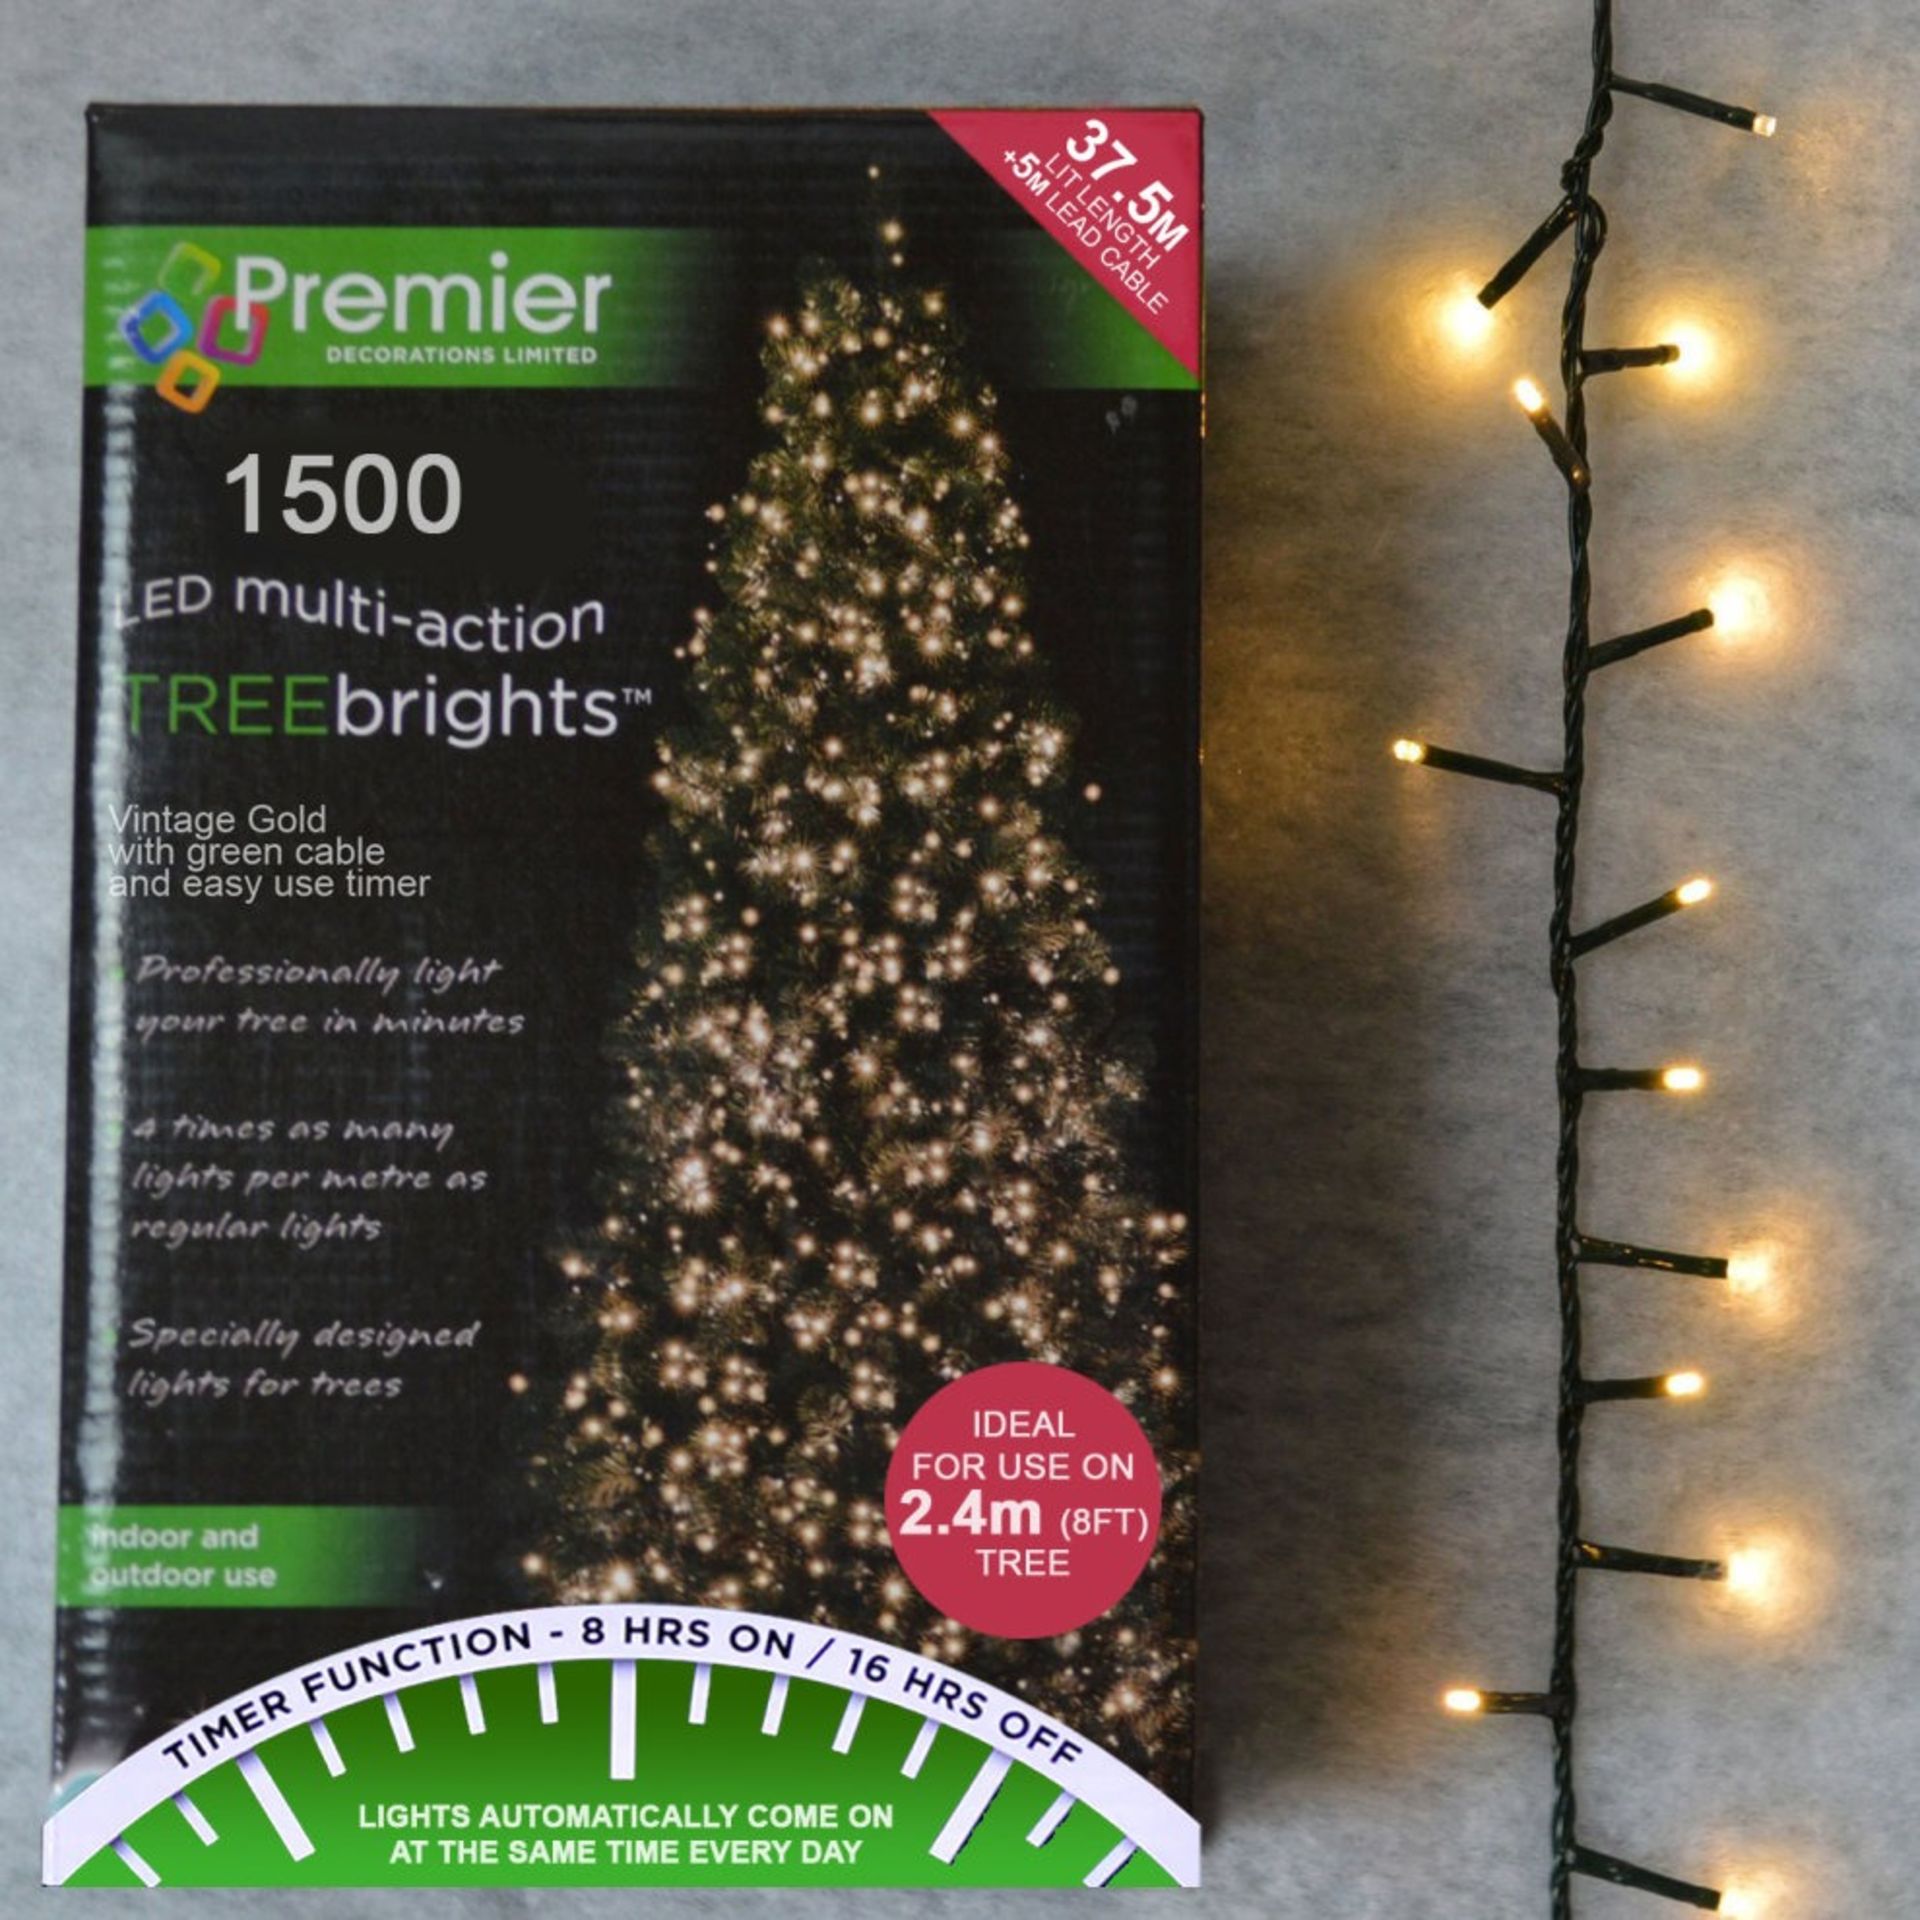 1500 LED 37.5m Premier TreeBrights Indoor Outdoor Christmas Multi Function Mains Operated String